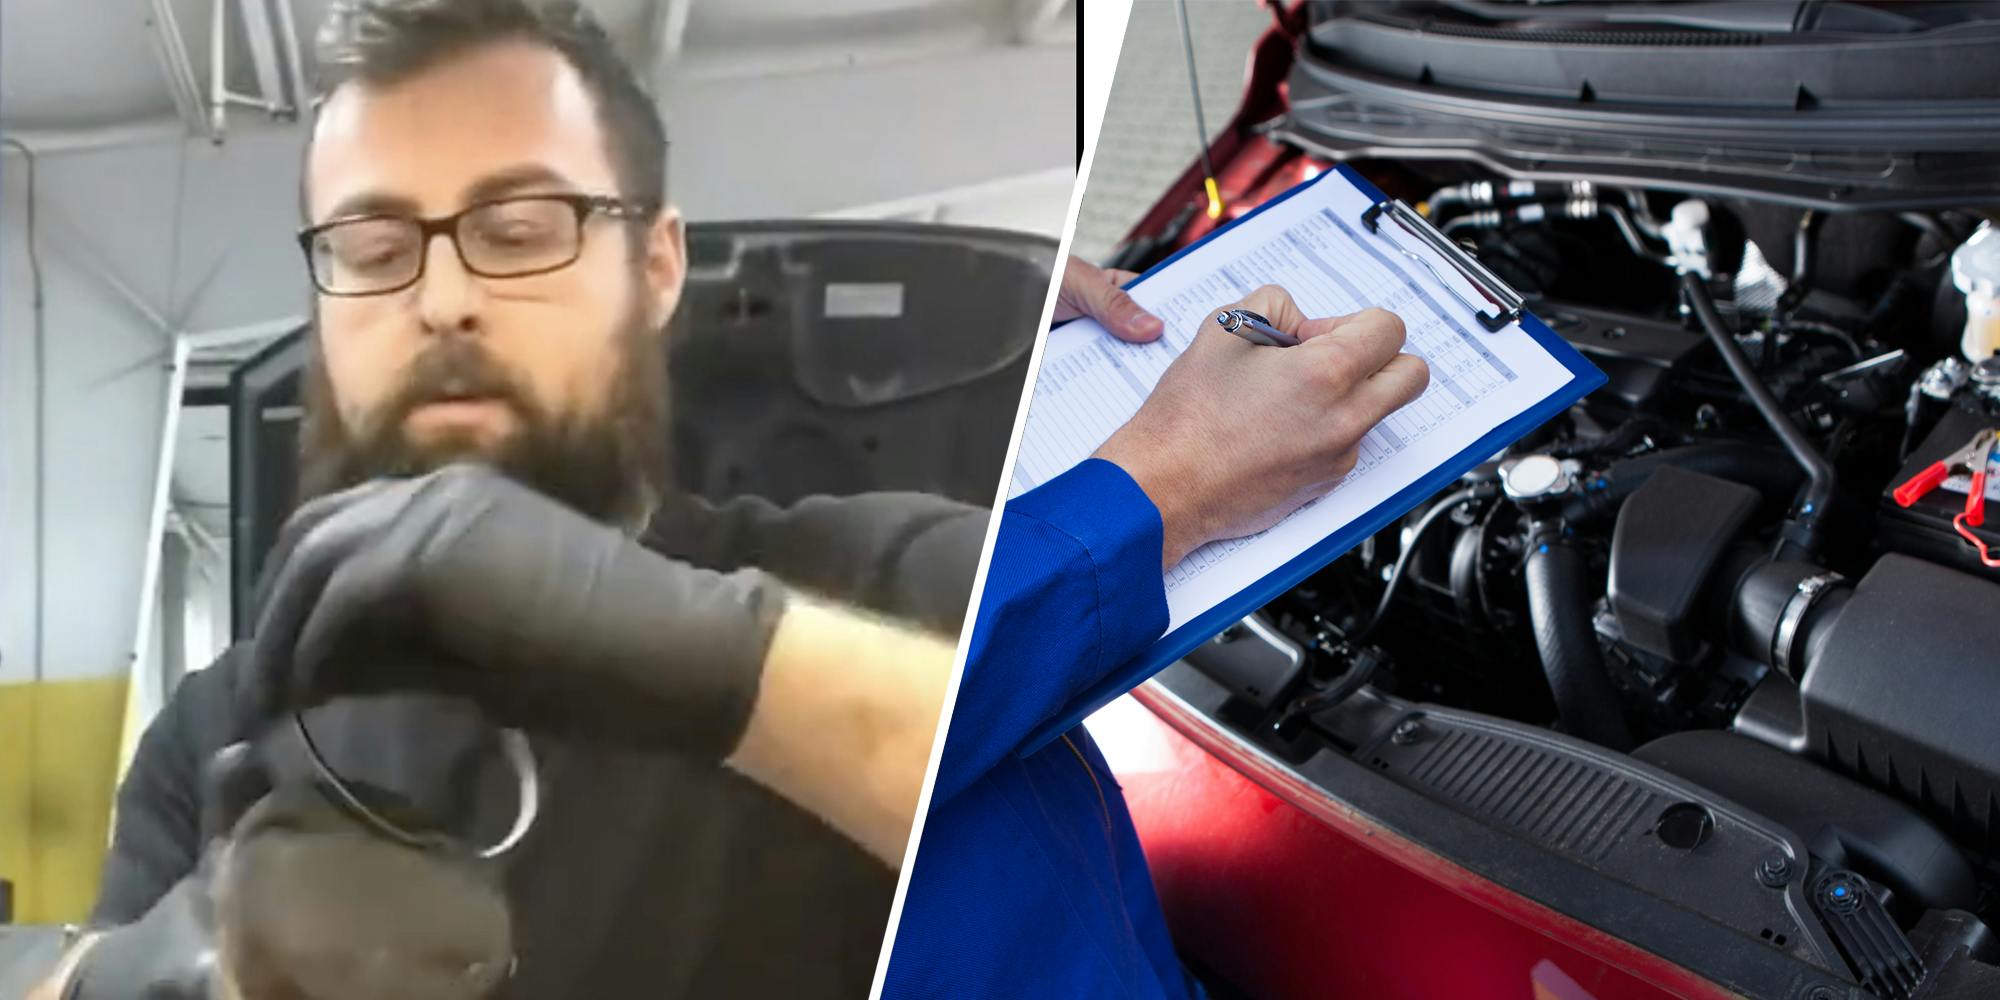 ‘That’ll be $200’: Mechanic slams customer for coming in with this 1 problem